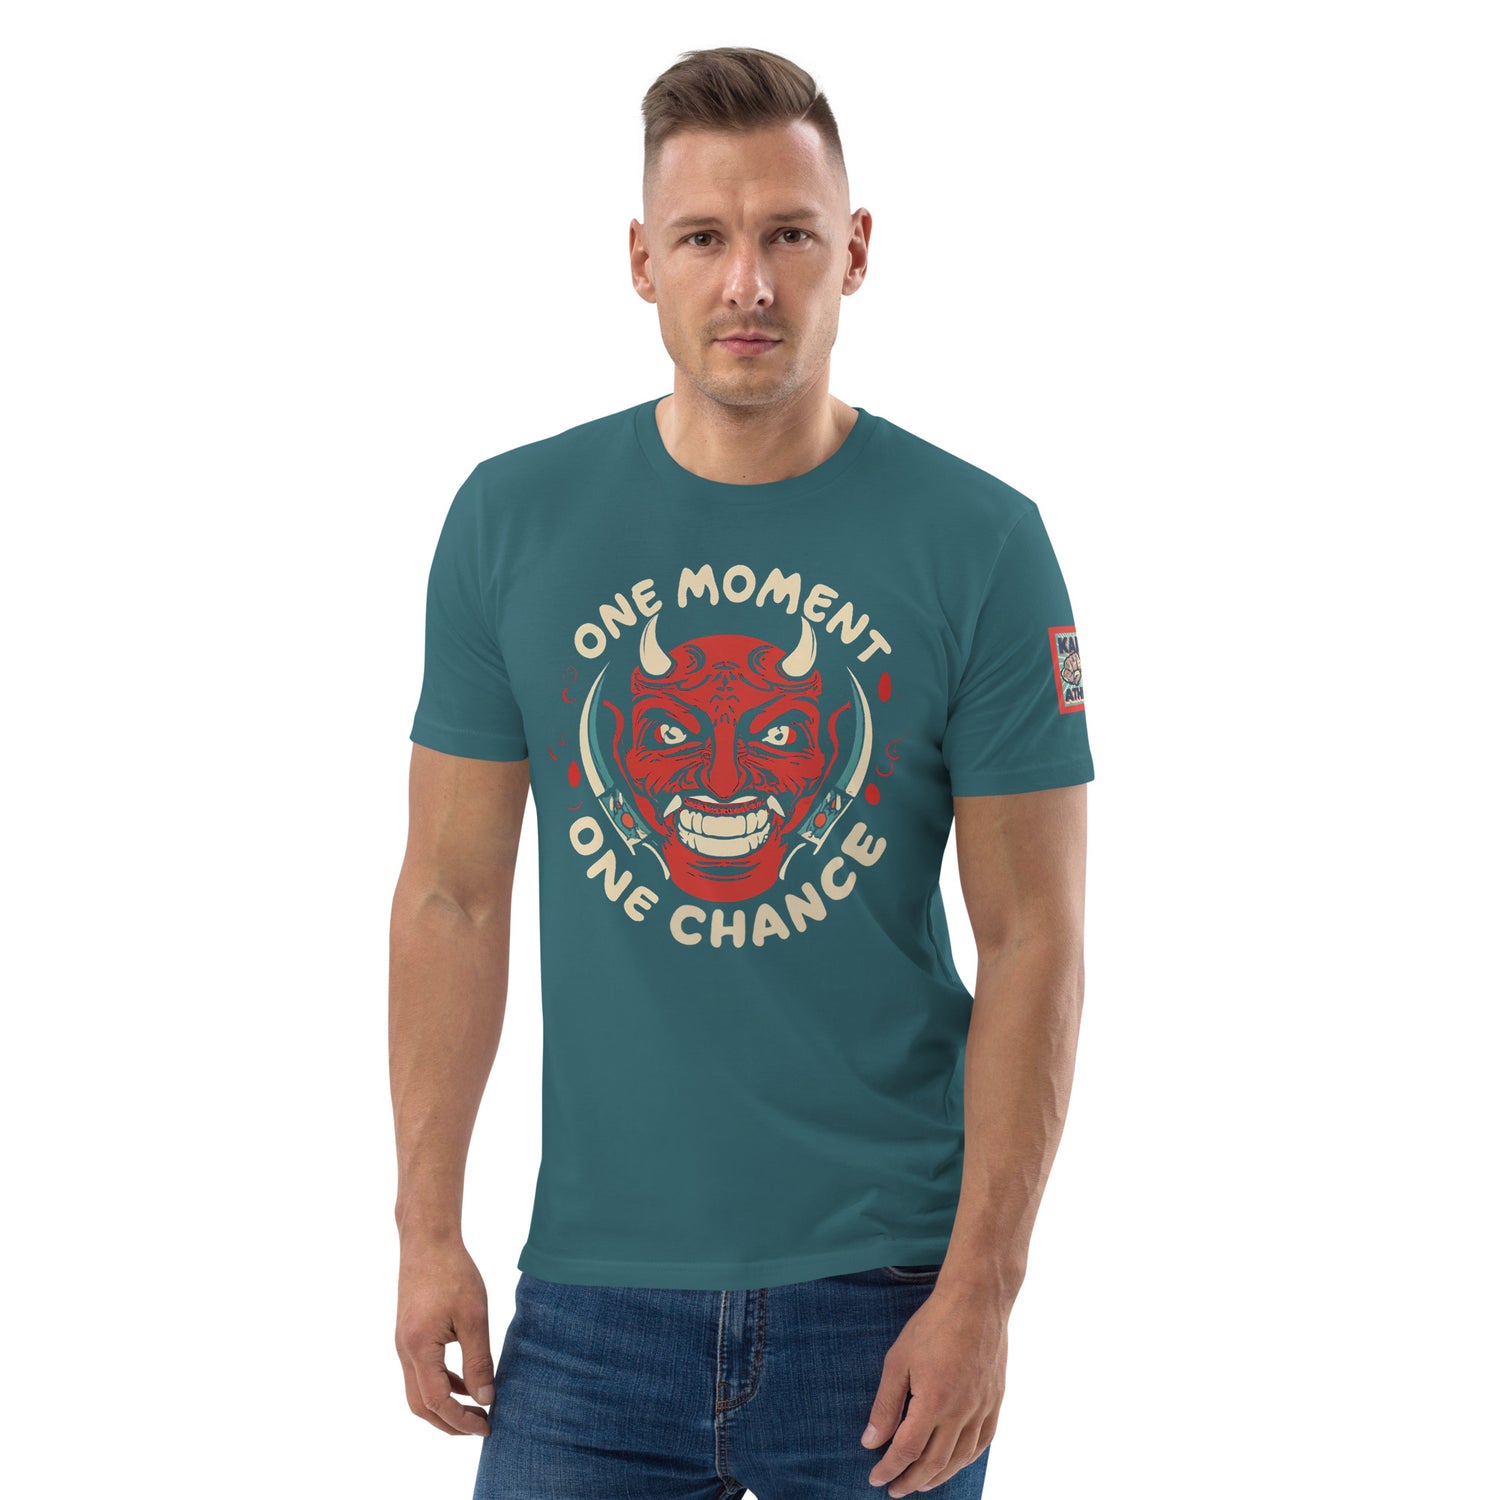 One Moment Unisex Organic Cotton T-Shirt by Kaizen Athletic